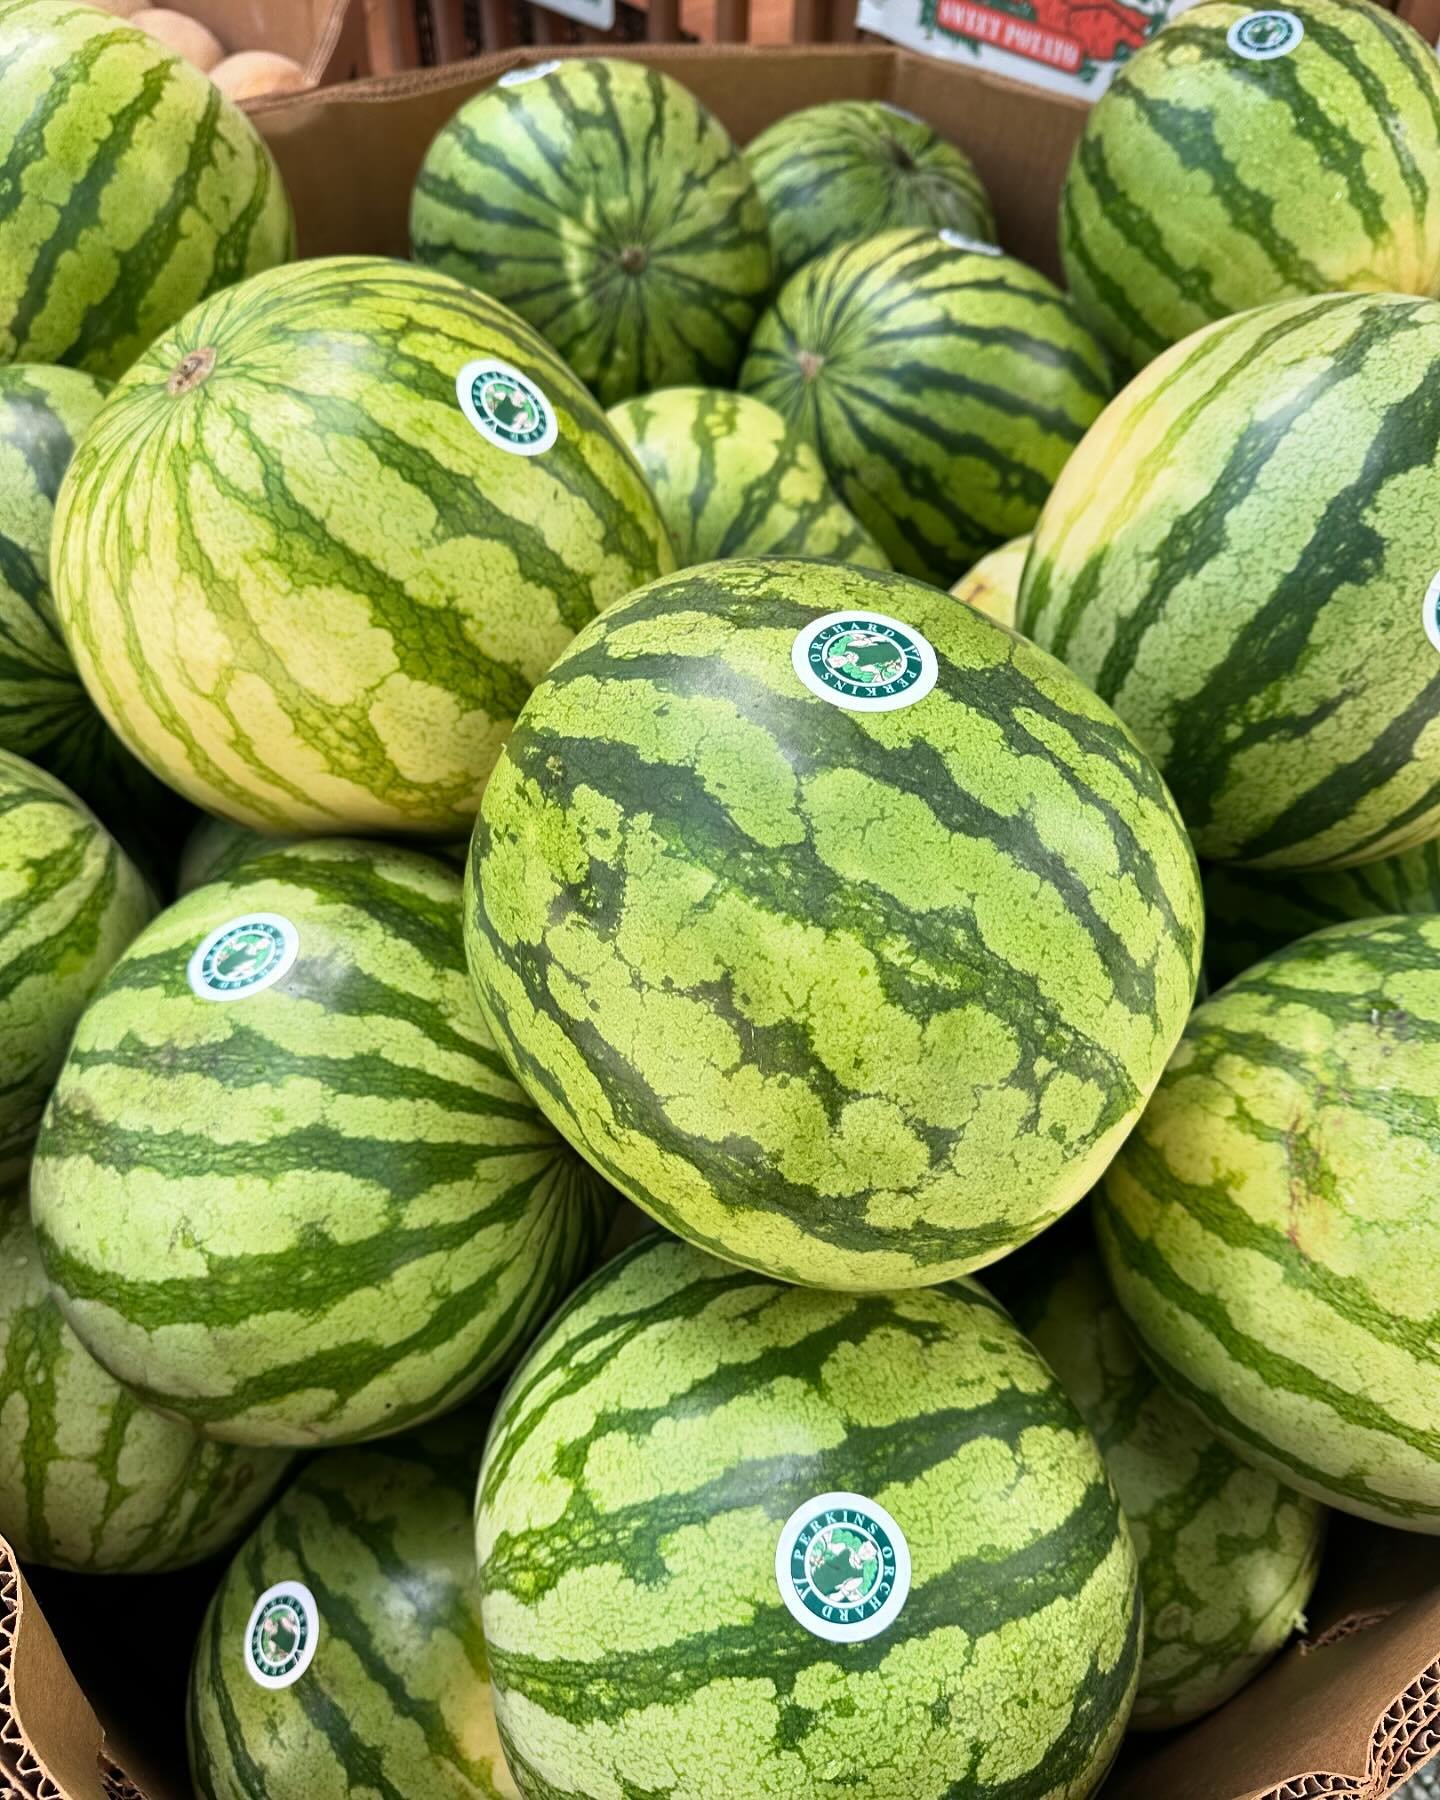 Surprise 🎉 Yellow Watermelons are here! First of the season, very sweet! It&rsquo;s an experience that you&rsquo;ll never forget